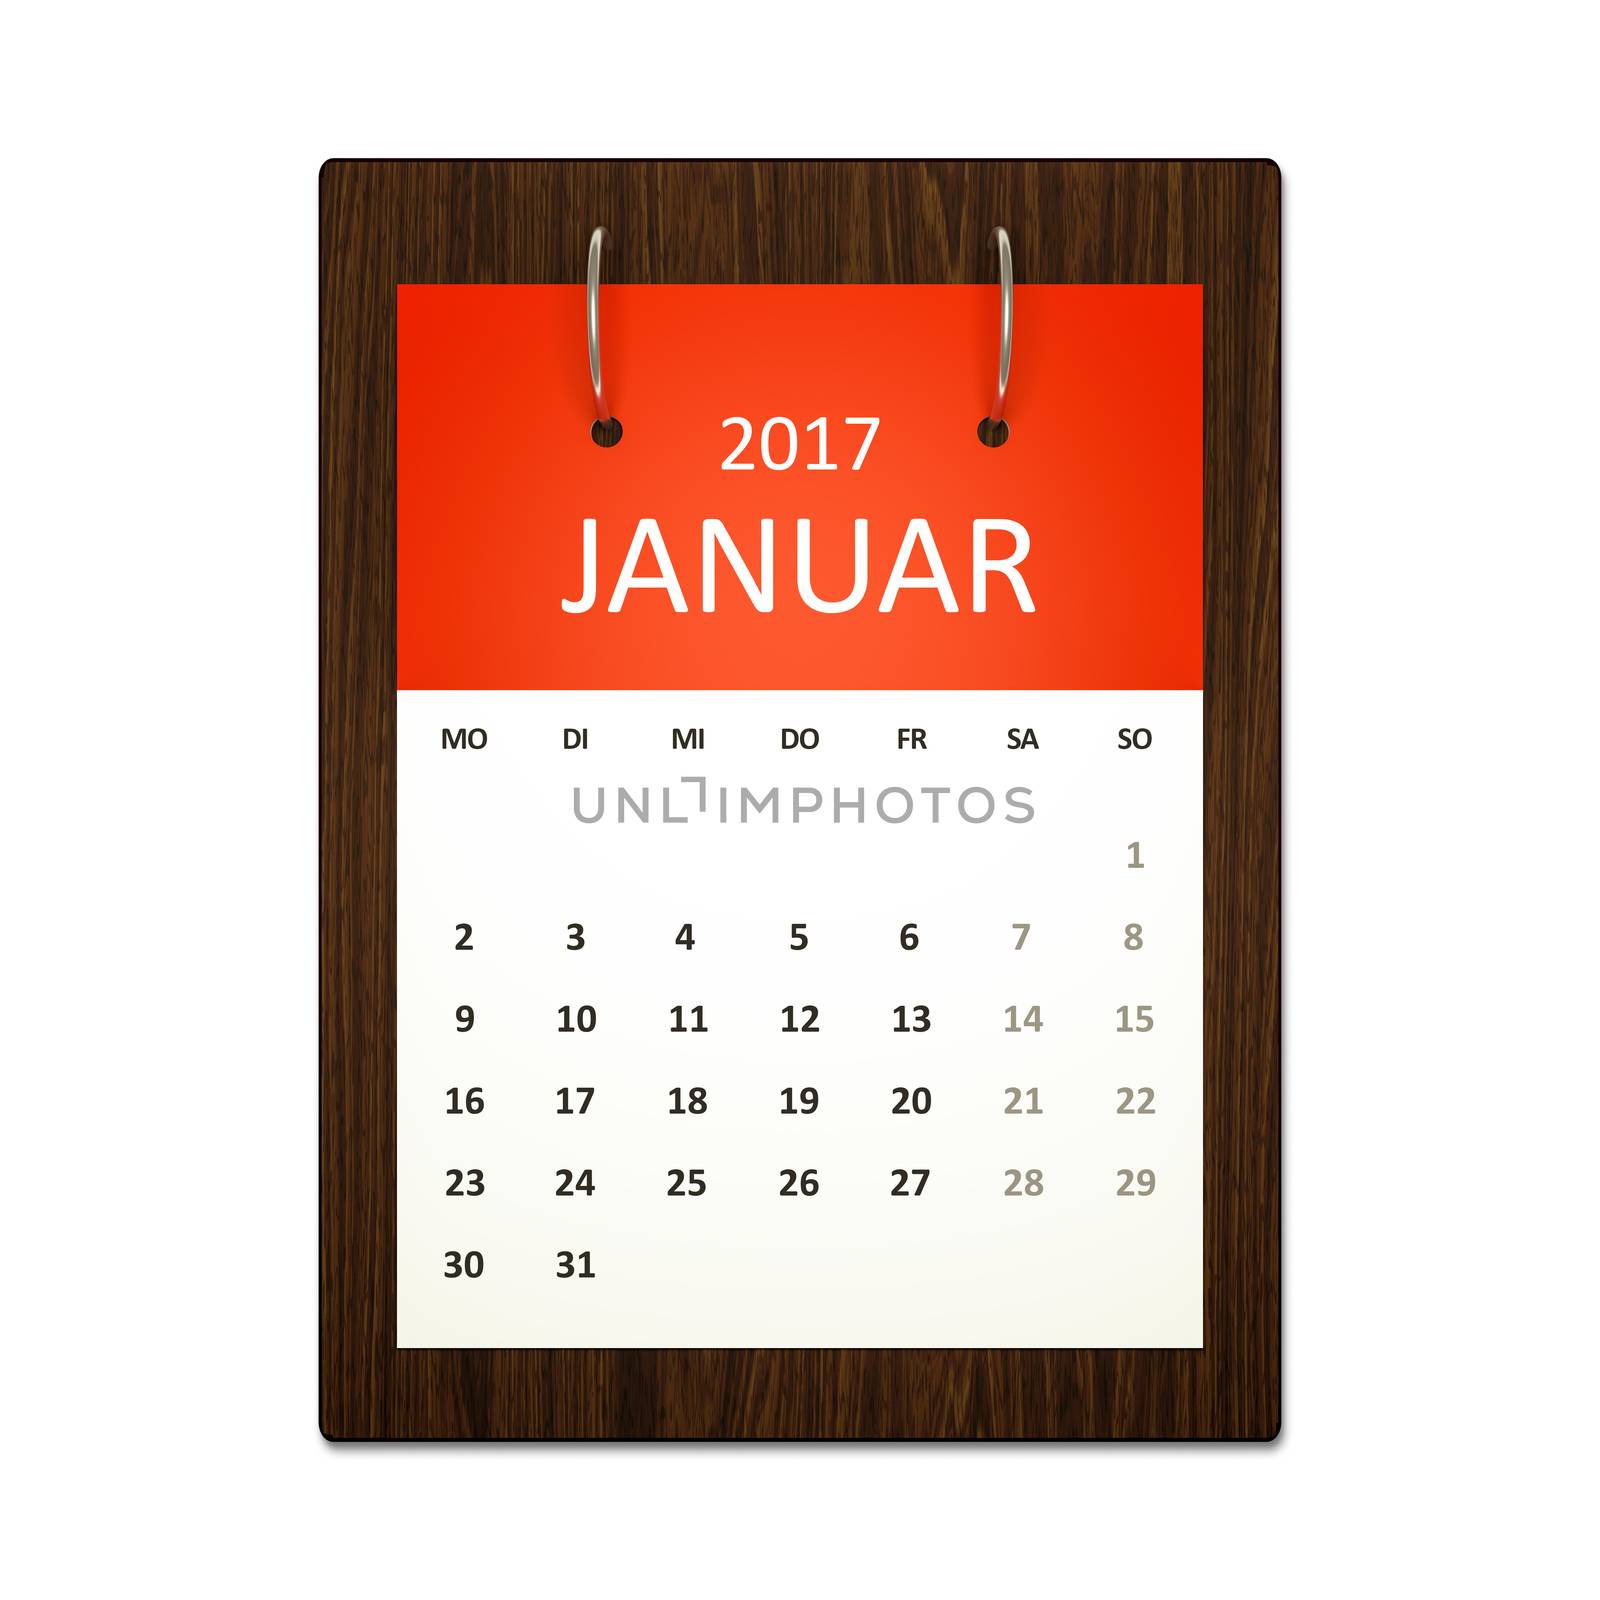 An image of a german calendar for event planning 2017 january